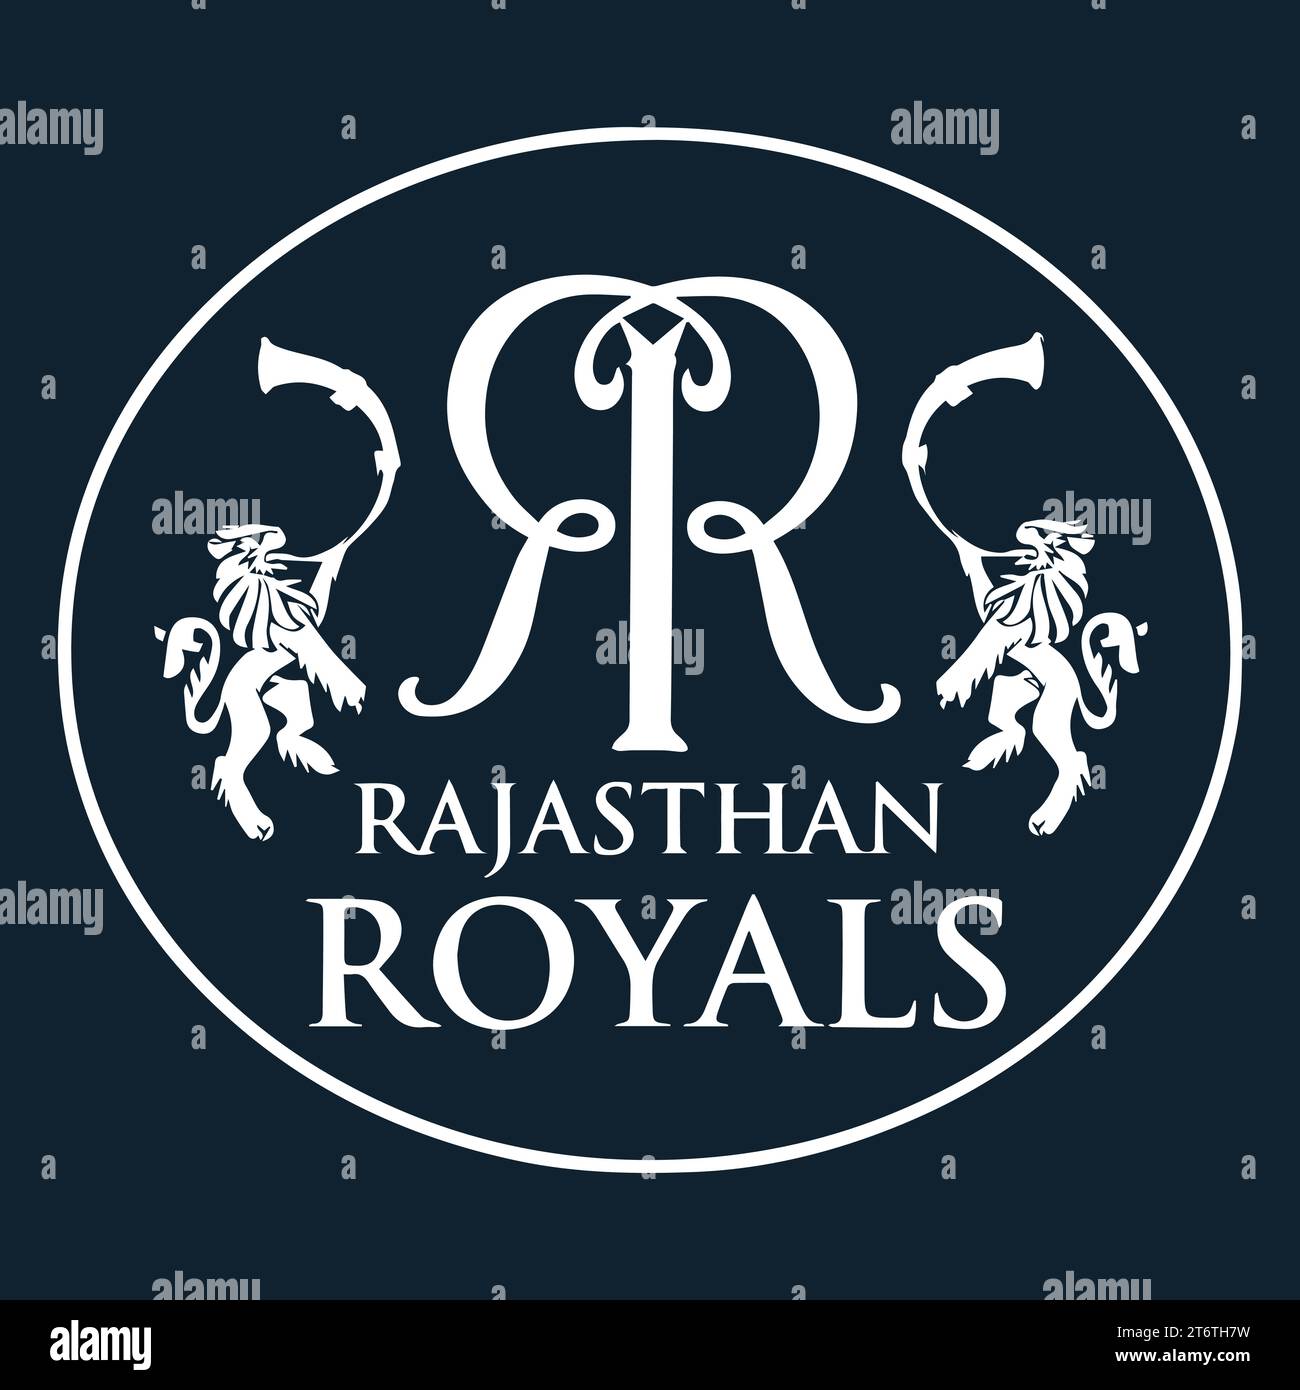 Rajasthan Royals Logo White Style Indian Professional Cricket club, illustrazione vettoriale immagine editabile astratta Illustrazione Vettoriale